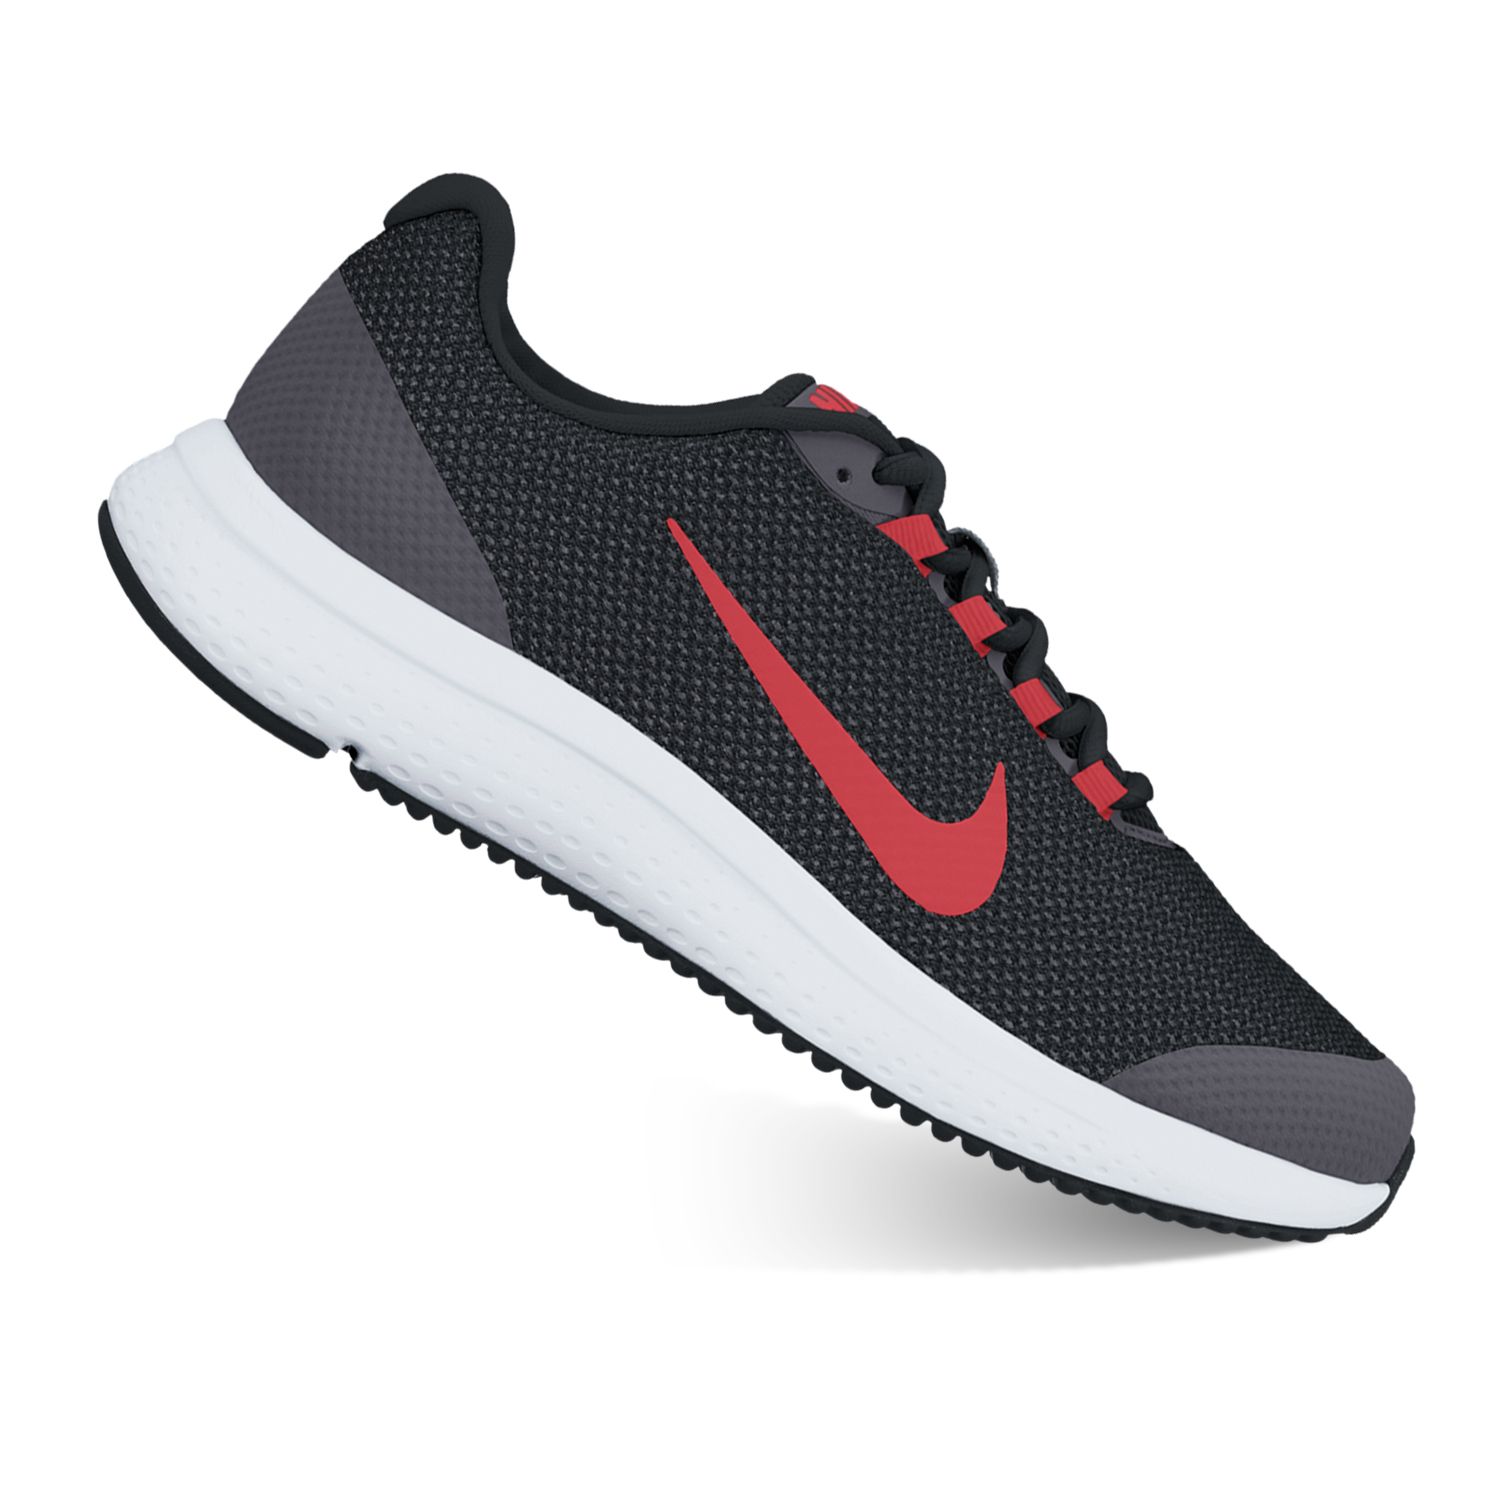 nike run all day mens running shoes